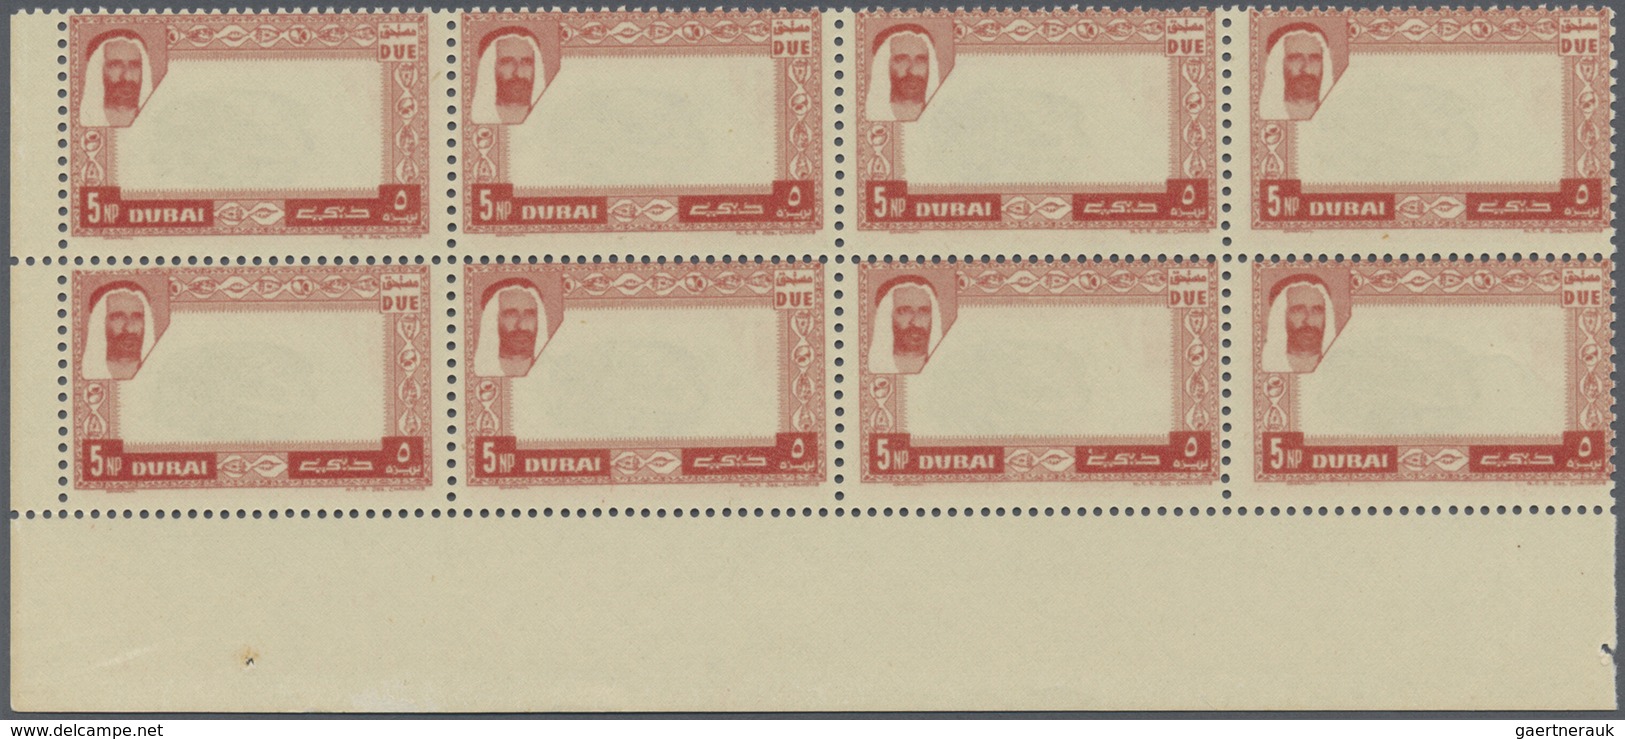 ** Dubai - Portomarken: 1963, Mussel 5np. With 2nd Printing Of Orange-red Frame On Gum Side In A Perf. - Dubai